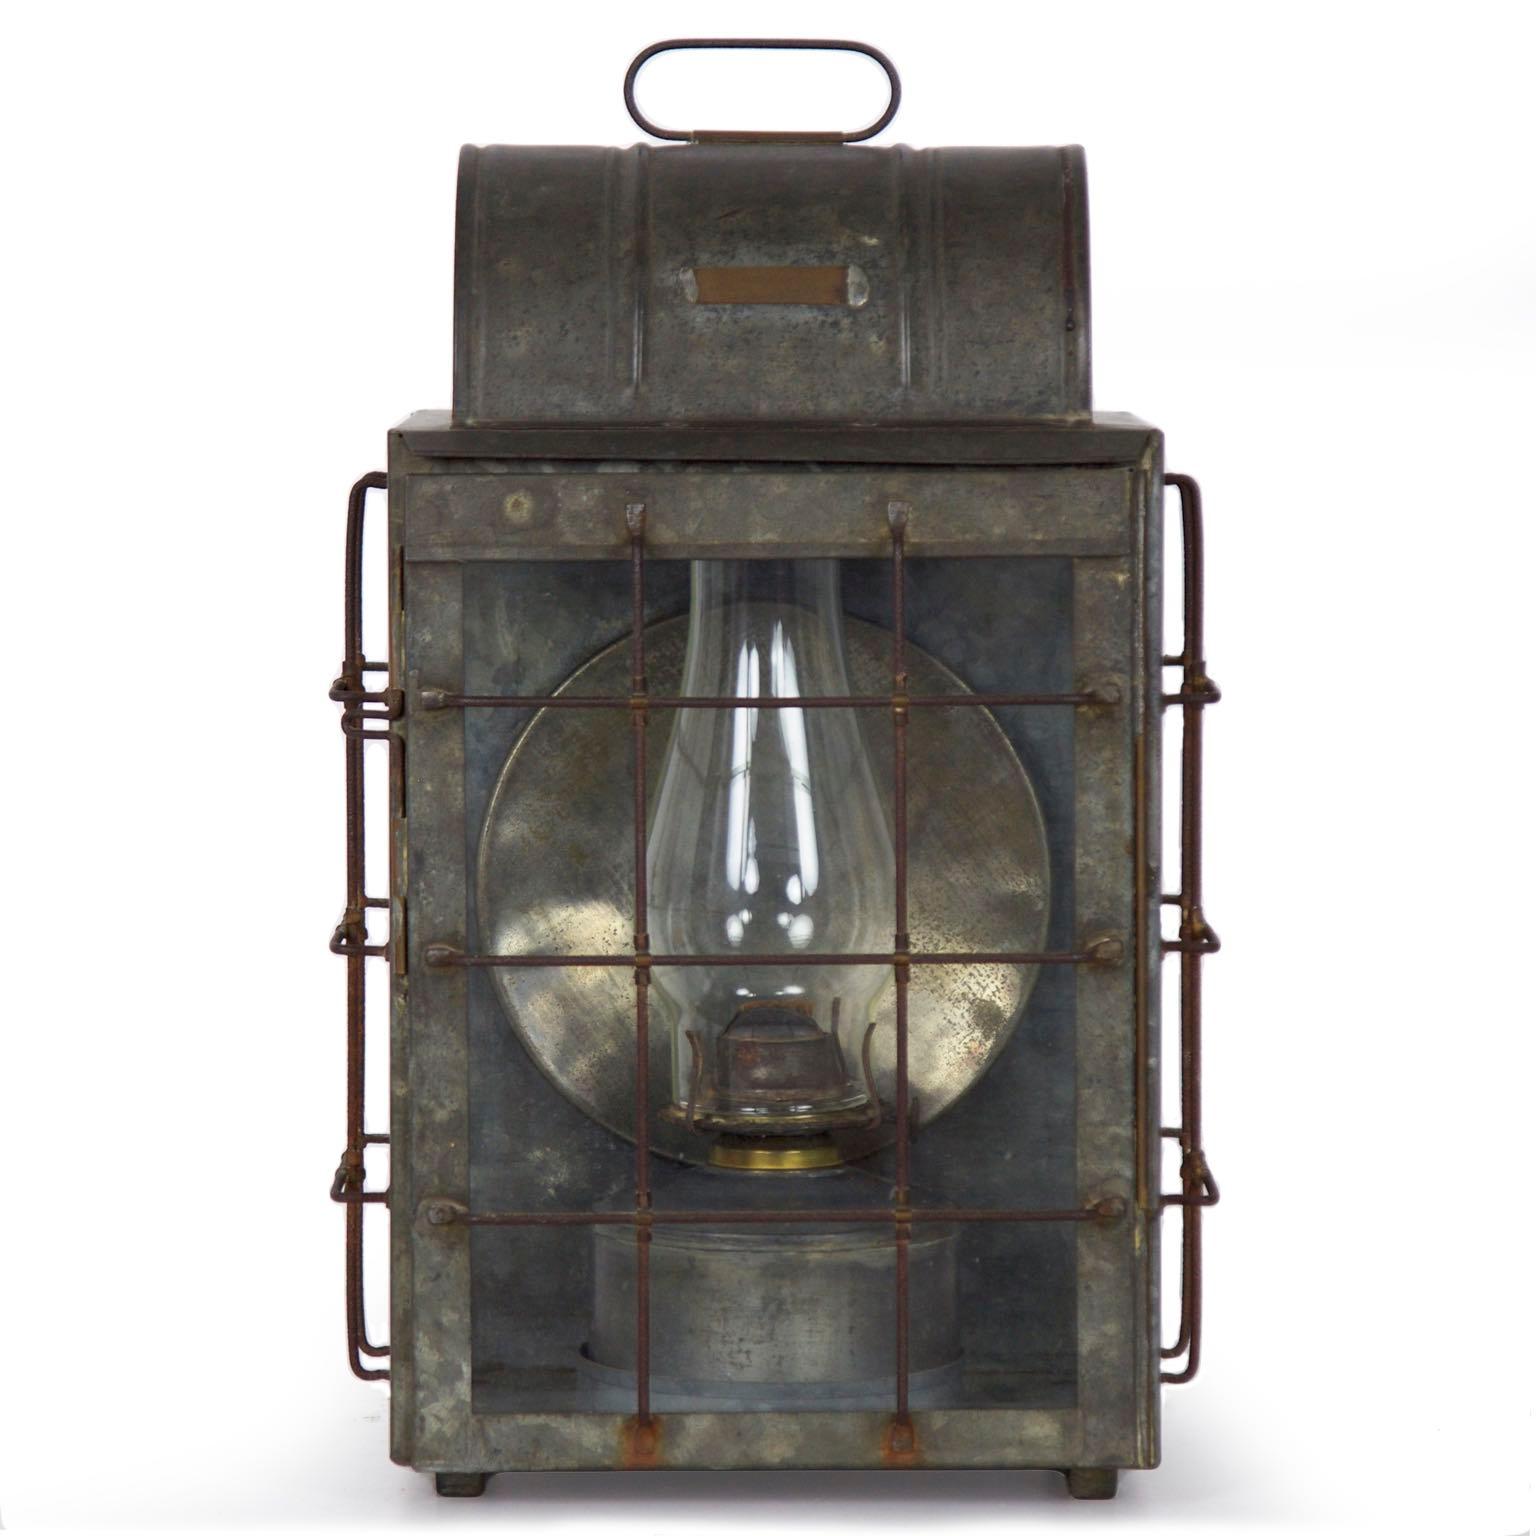 This fine National Marine Lamp Co. bulkhead lantern sports the original brass plaque noting “MFRD by National Marine Lamp Company, New York” and an early hurricane over an original oil lamp. It retains original glass and the surfaces remain